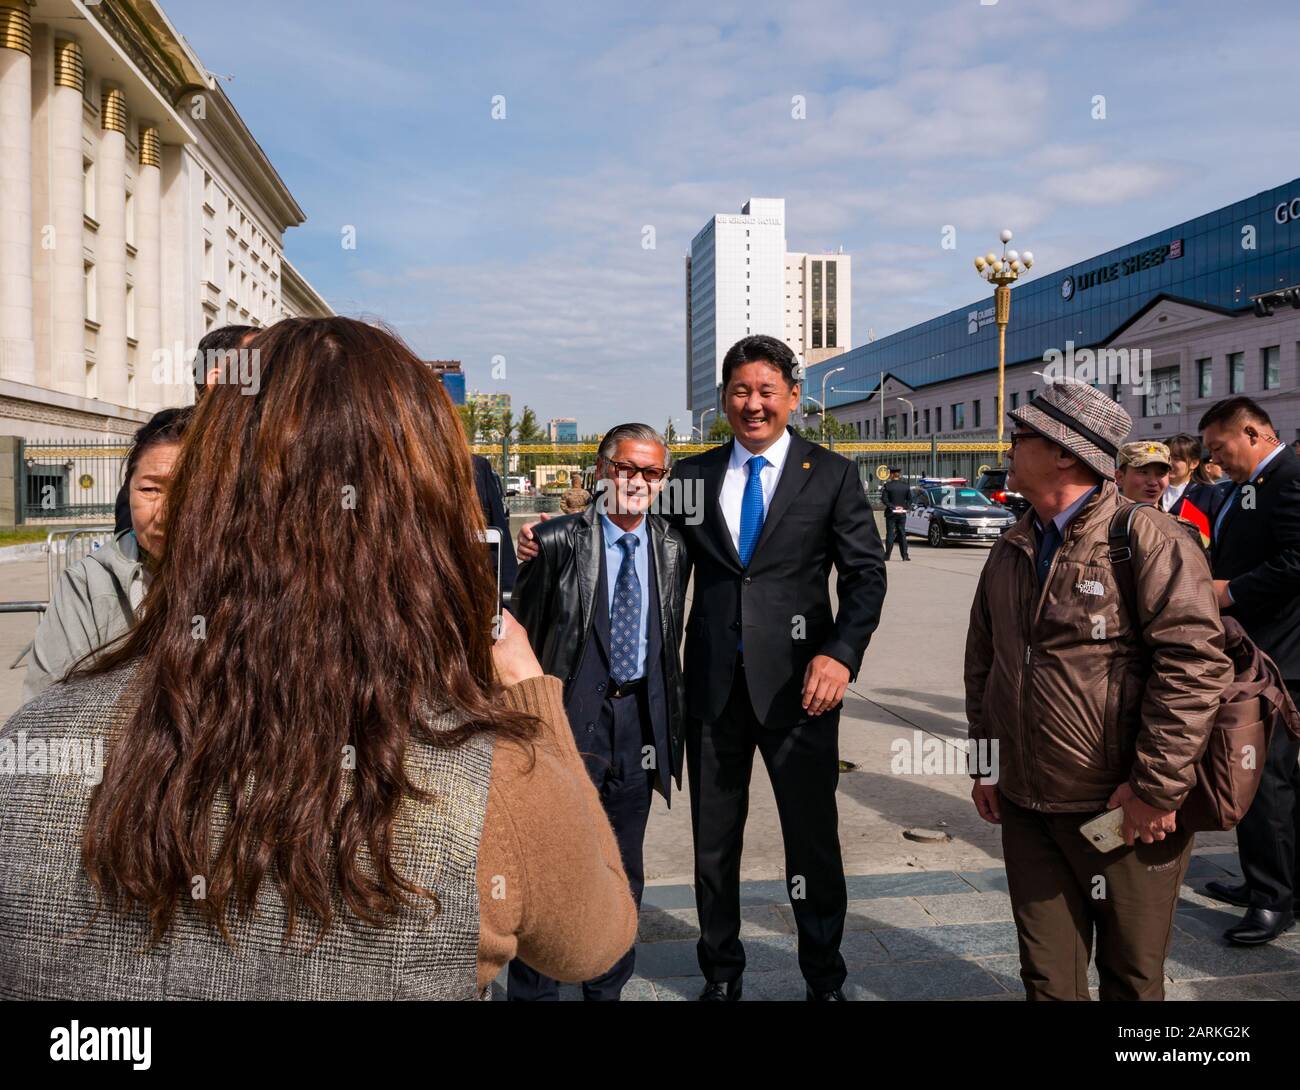 Prime Minister of Mongolia, Ukhnaagiin Khurelsukh, posing for photo with supporters, Sükhbaatar Square, Ulaanbaatar, Mongolia Stock Photo